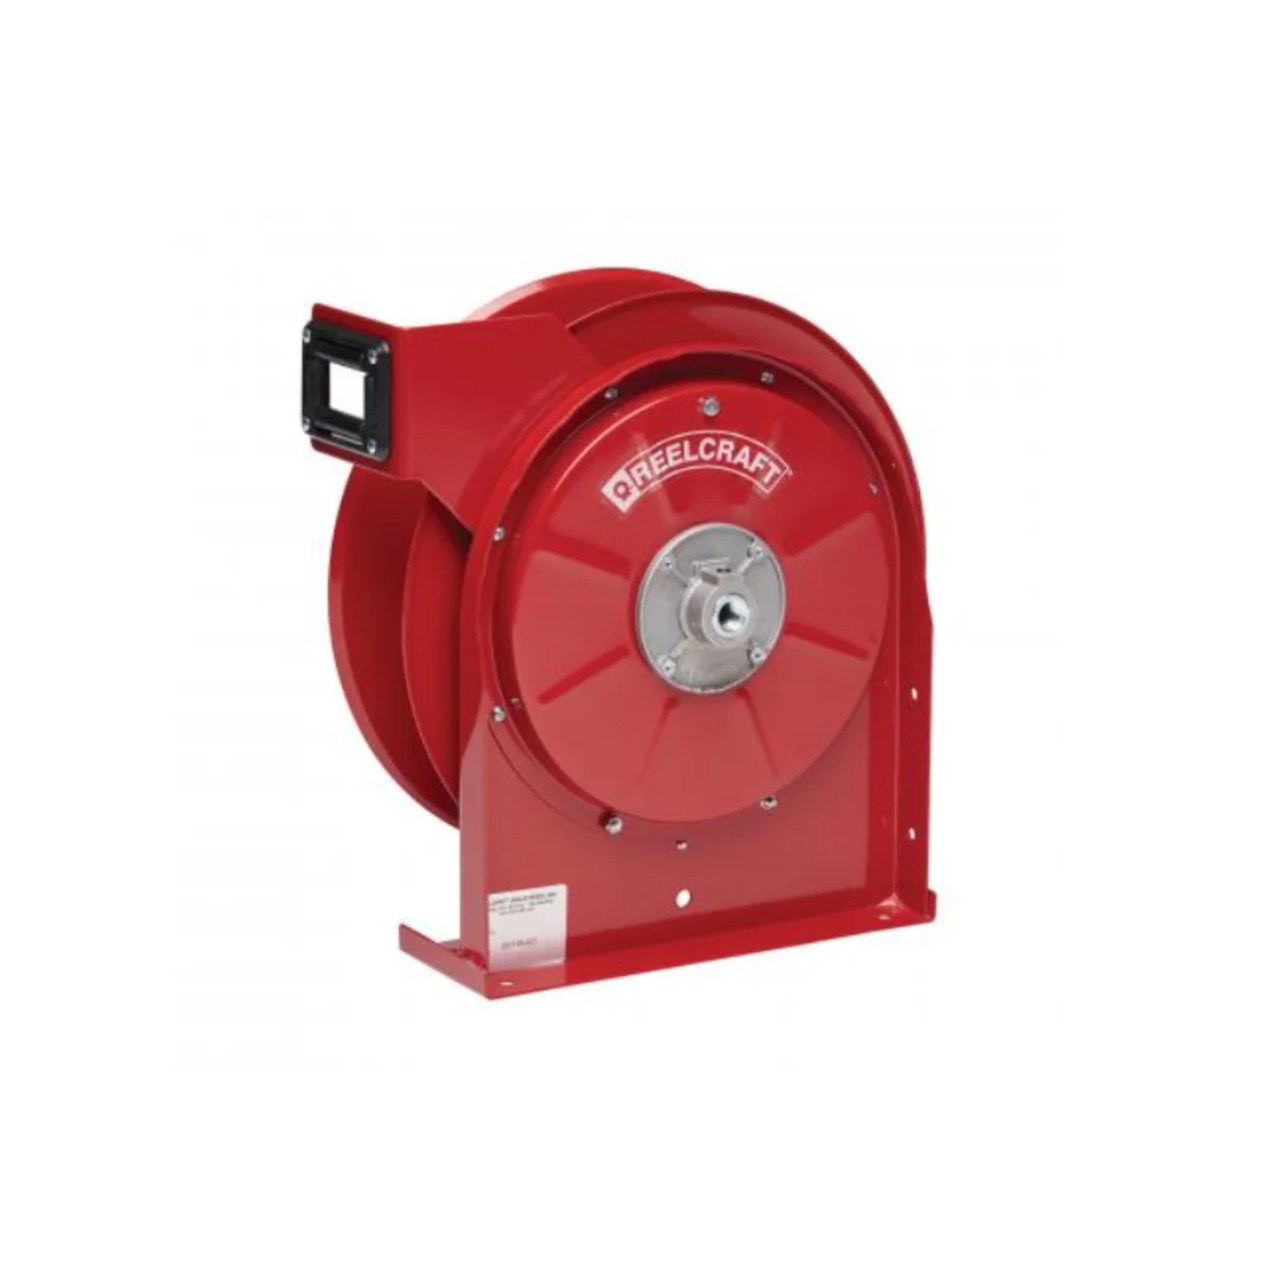 Reelcraft 5400 OHP 1/4 in. x 30 ft. Premium Duty Hose Reel